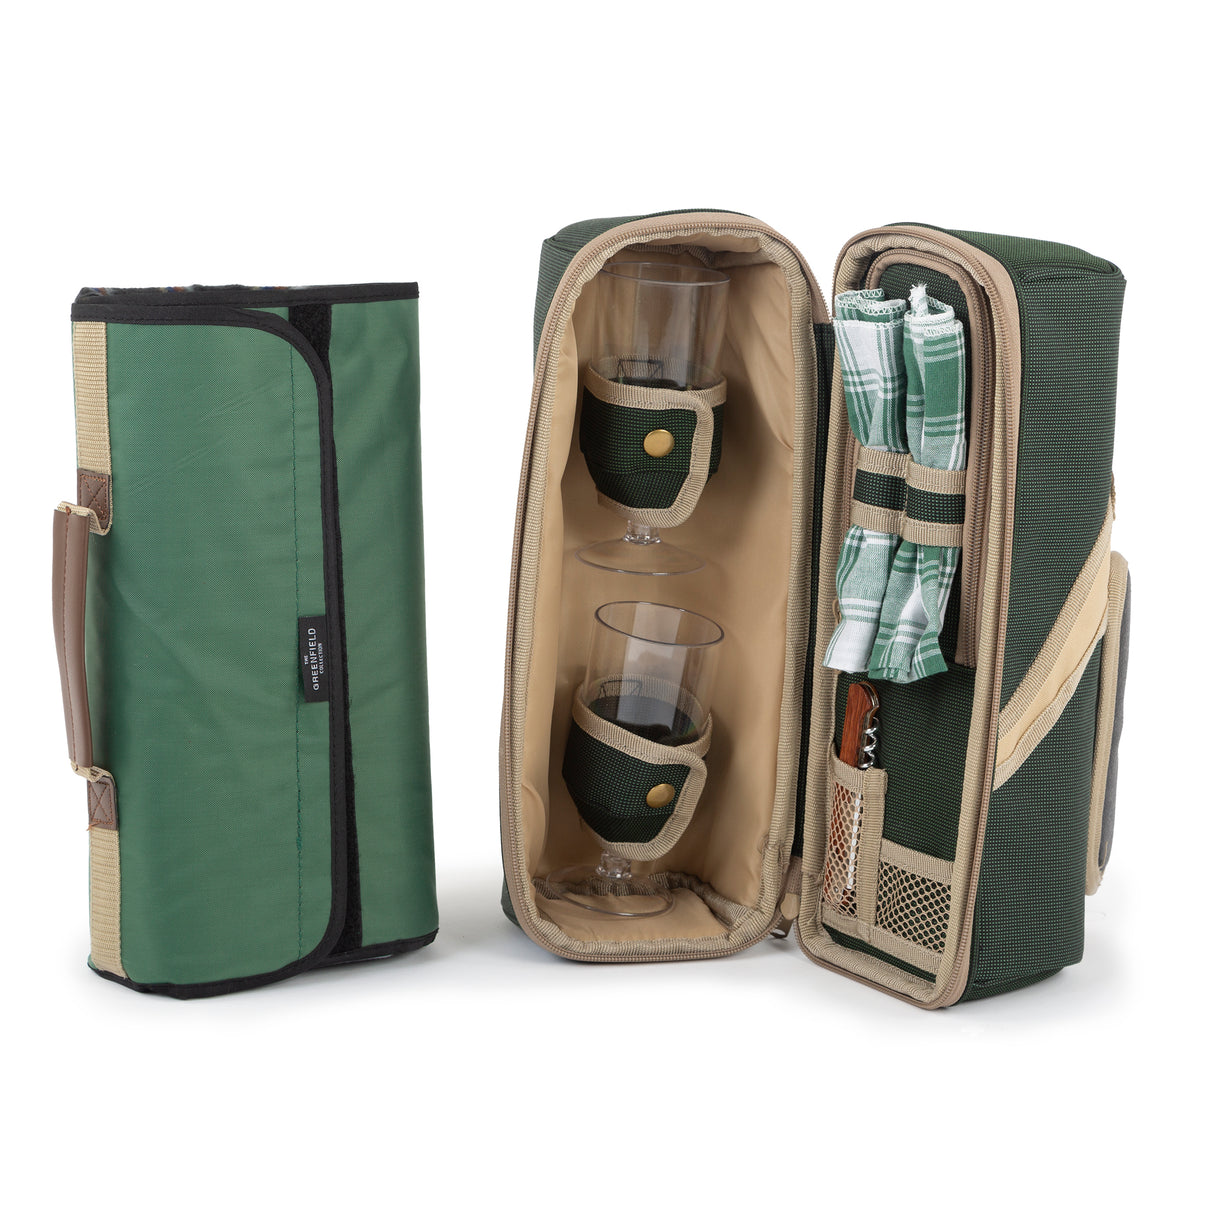 Greenfield Collection Deluxe Wine Cooler Bag for Two People with Matching Picnic Blanket - The Greenfield Collection